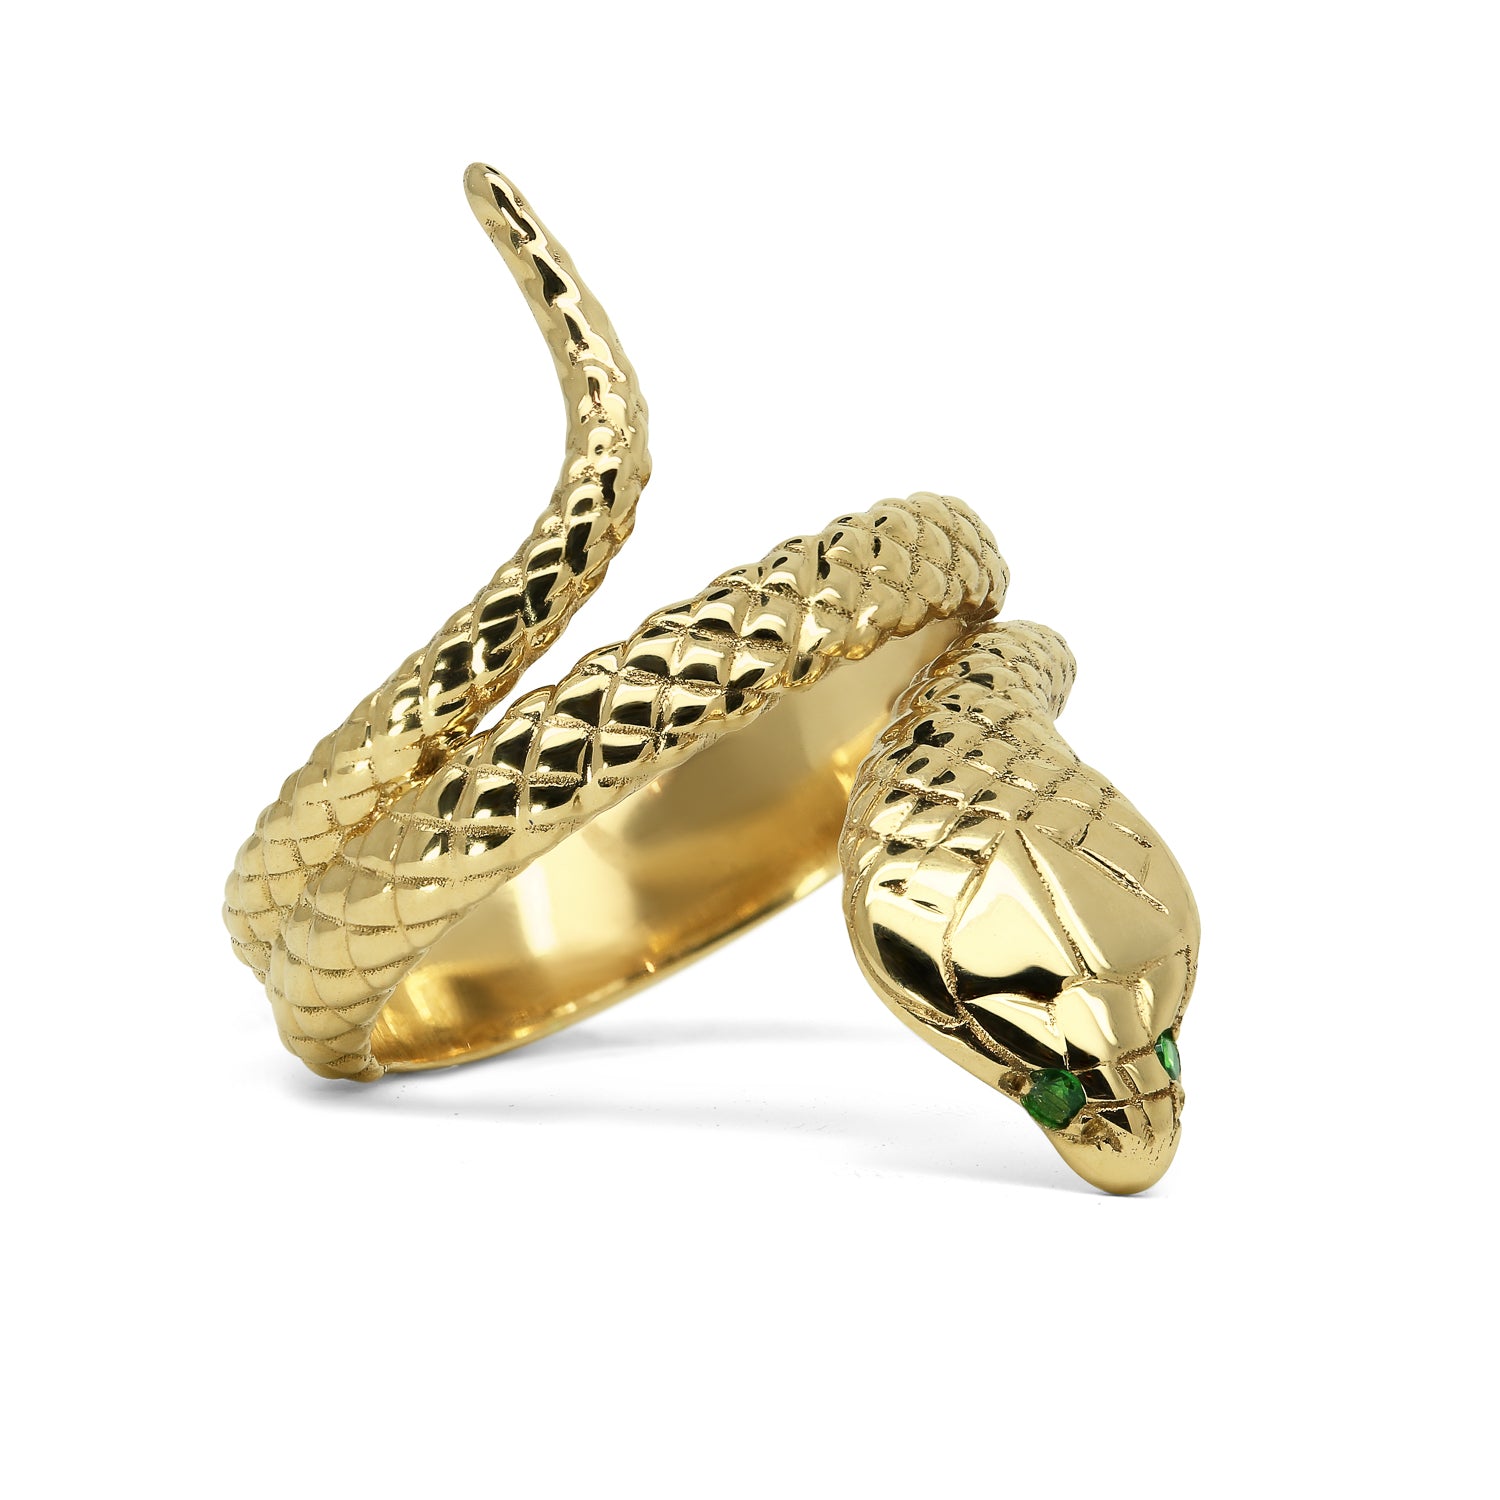 Bespoke Cobra Ring - hand-engraved 9ct recycled gold and ethical green garnets